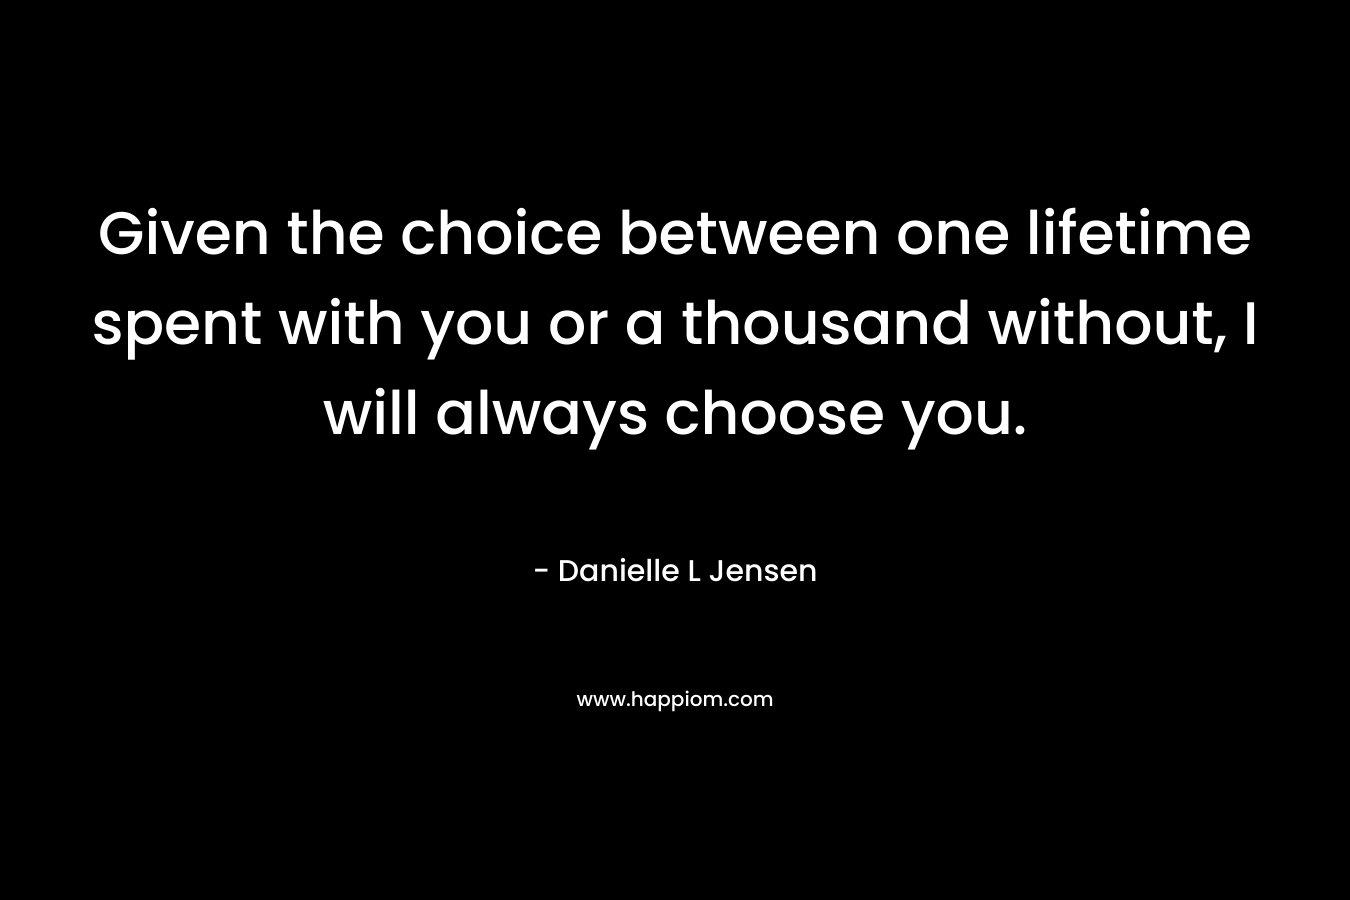 Given the choice between one lifetime spent with you or a thousand without, I will always choose you. – Danielle L Jensen